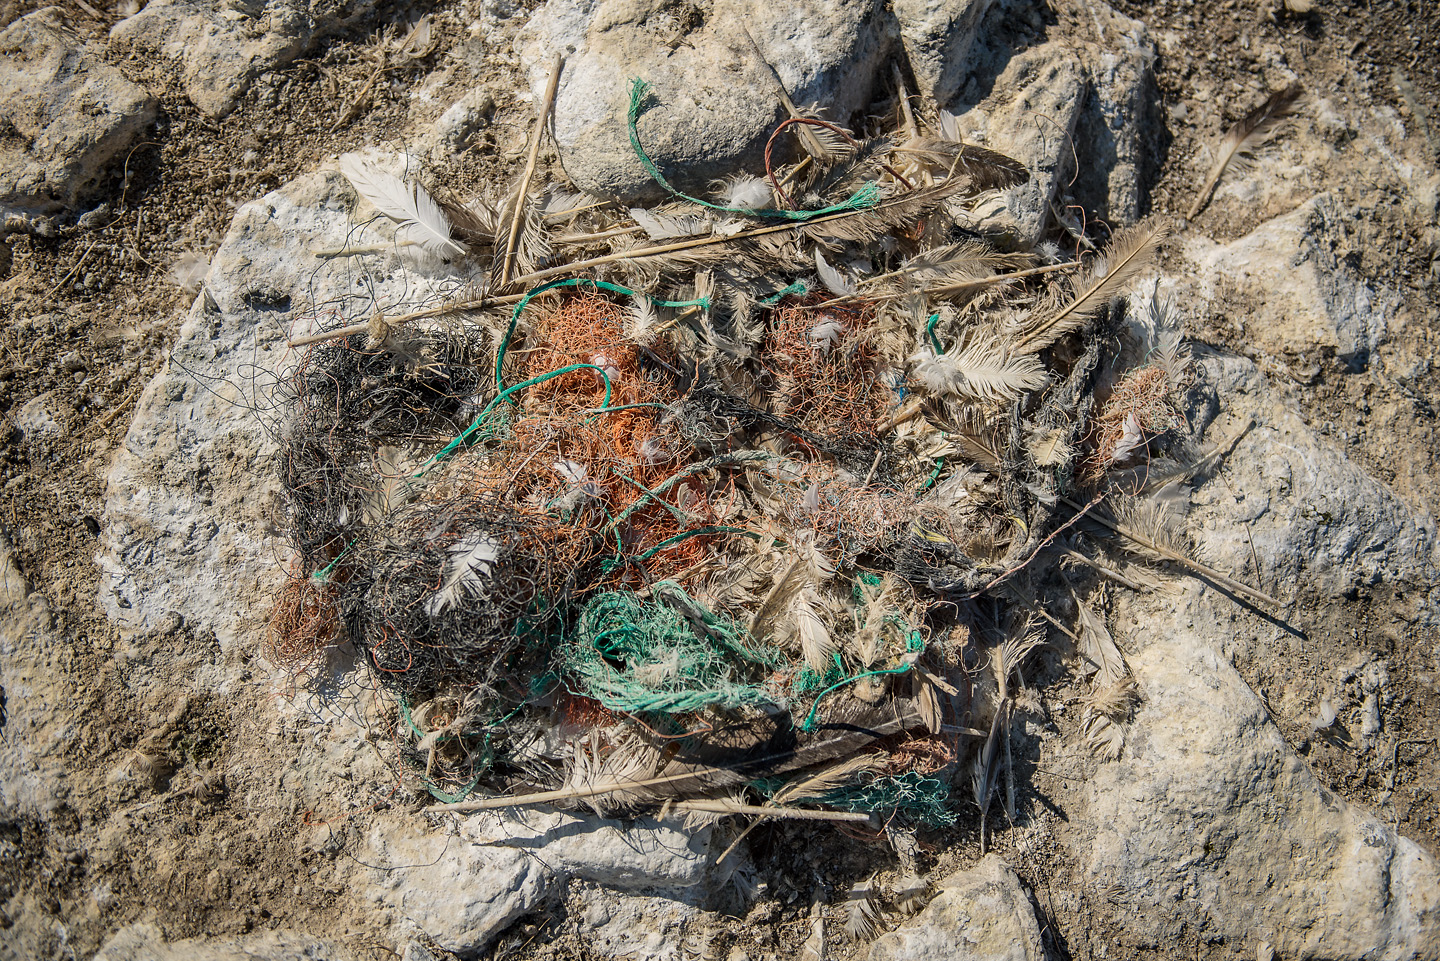  Removing the plastic would mean destroying nests and for a species which returns to the same nest each year, this would be too disruptive to the colony 